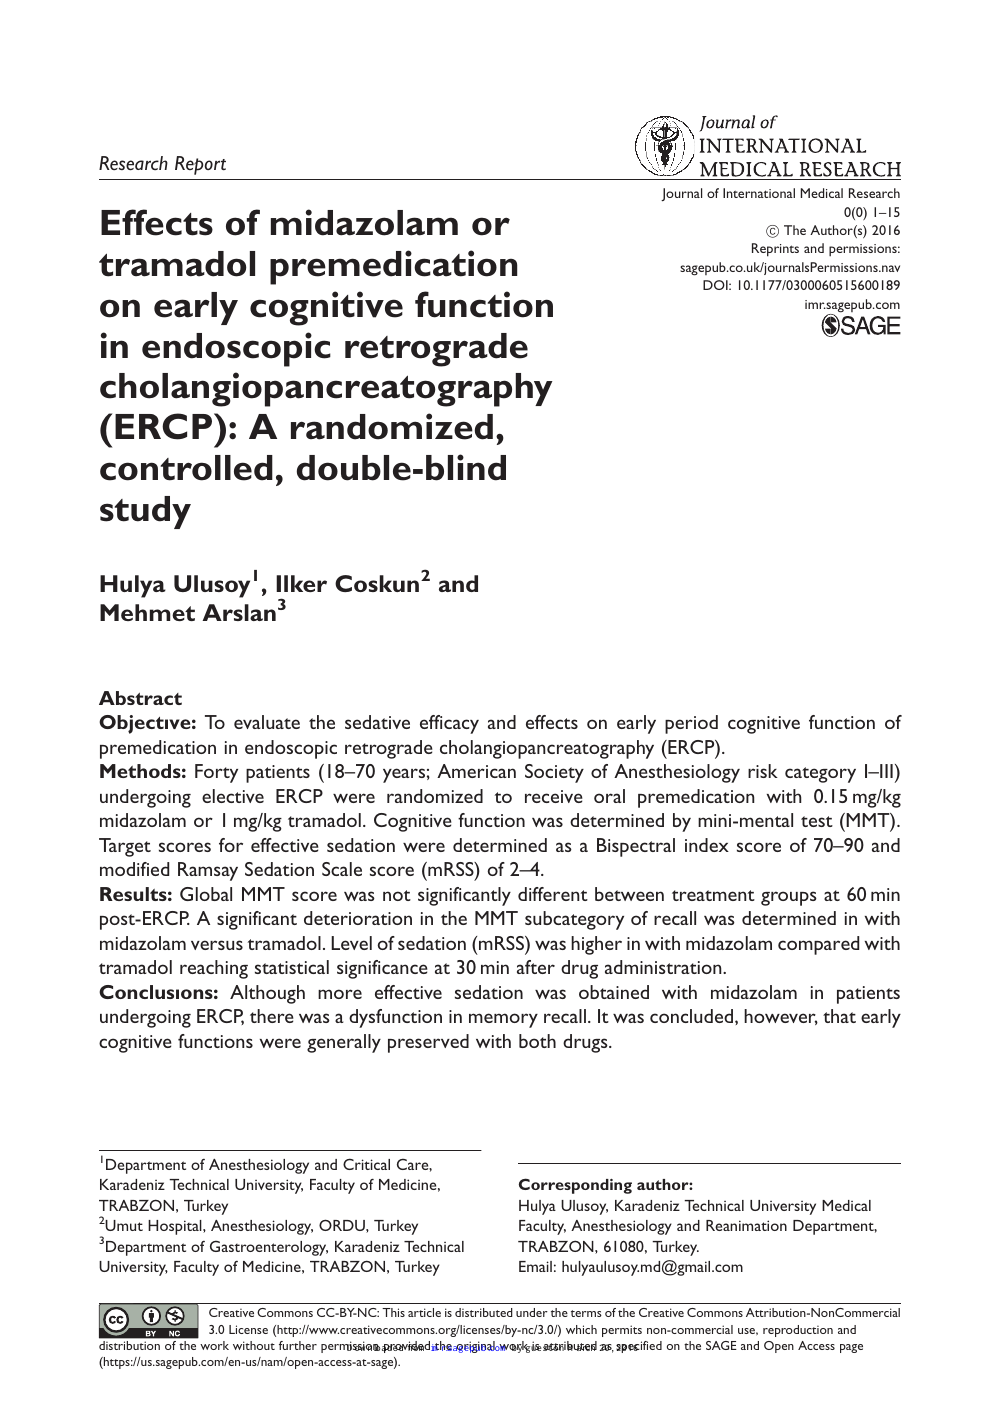 Effects Of Midazolam Or Tramadol Premedication On Early Cognitive Function In Endoscopic Retrograde Cholangiopancreatography Ercp A Randomized Controlled Double Blind Study Topic Of Research Paper In Clinical Medicine Download Scholarly Article Pdf